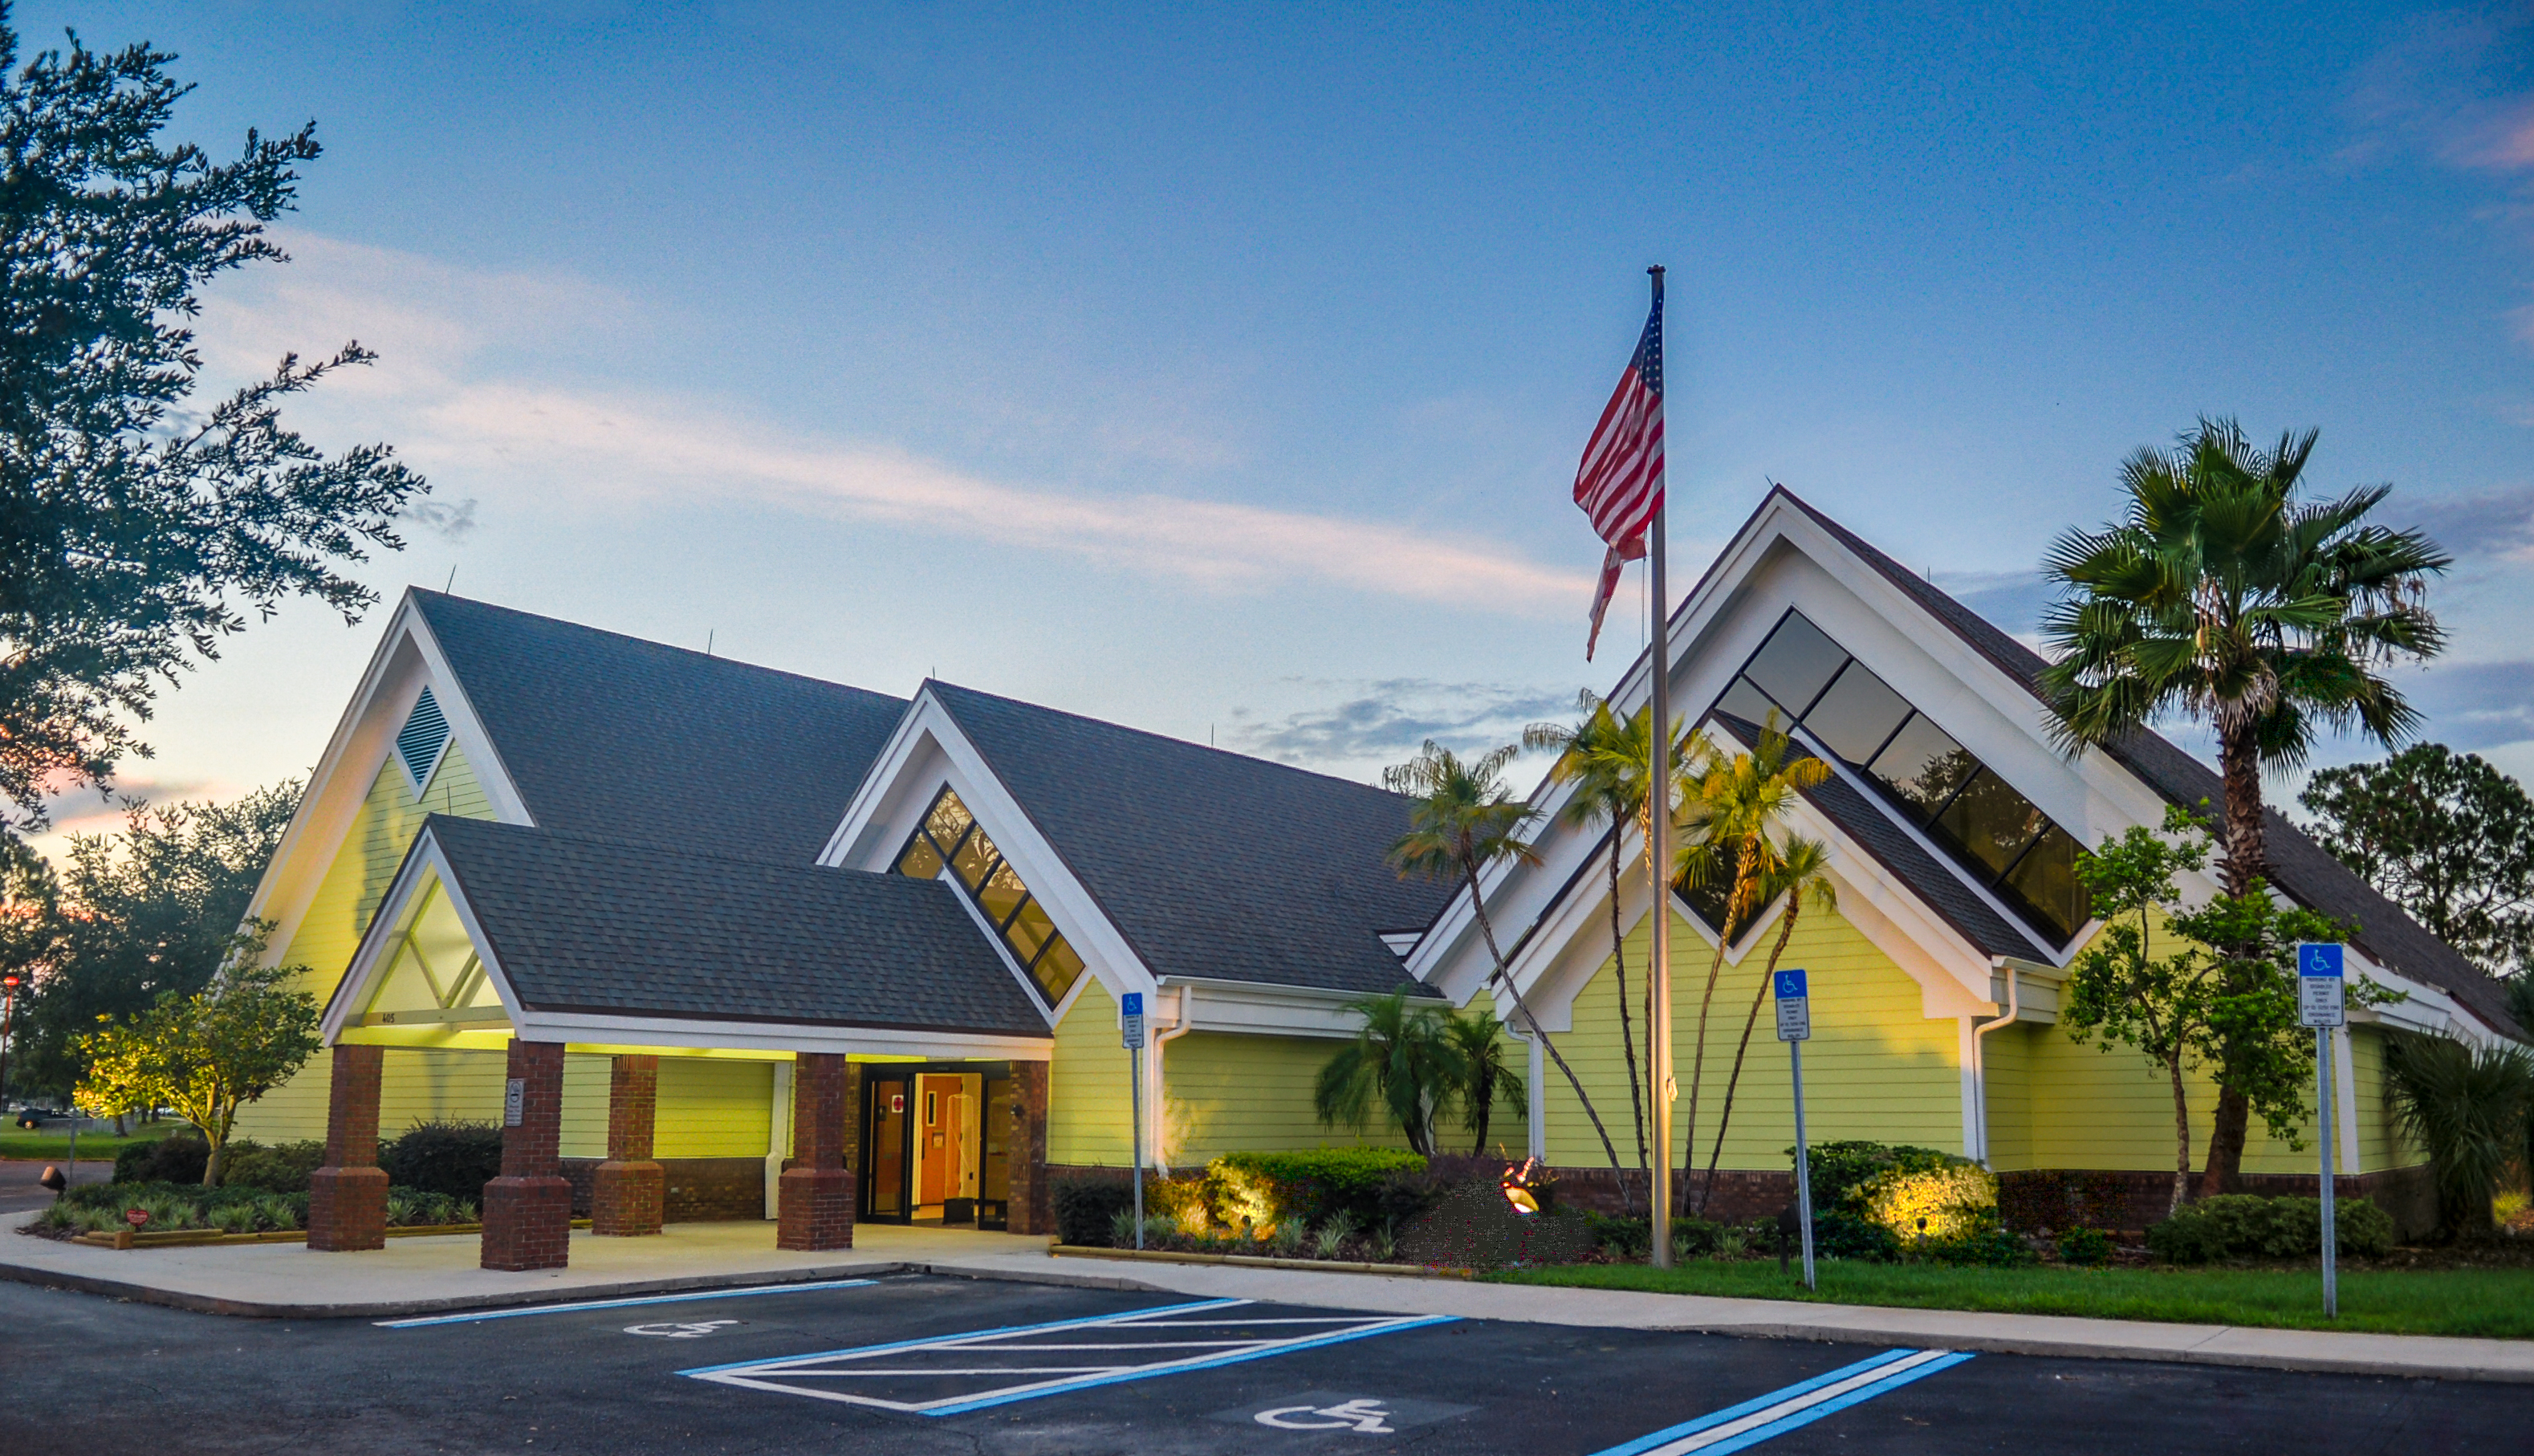 The Buenaventura Lakes Branch Library, located at 405 Buenaventura Boulevard in Kissimmee, has recently reopened after undergoing significant improvements to the interior and exterior of the building.